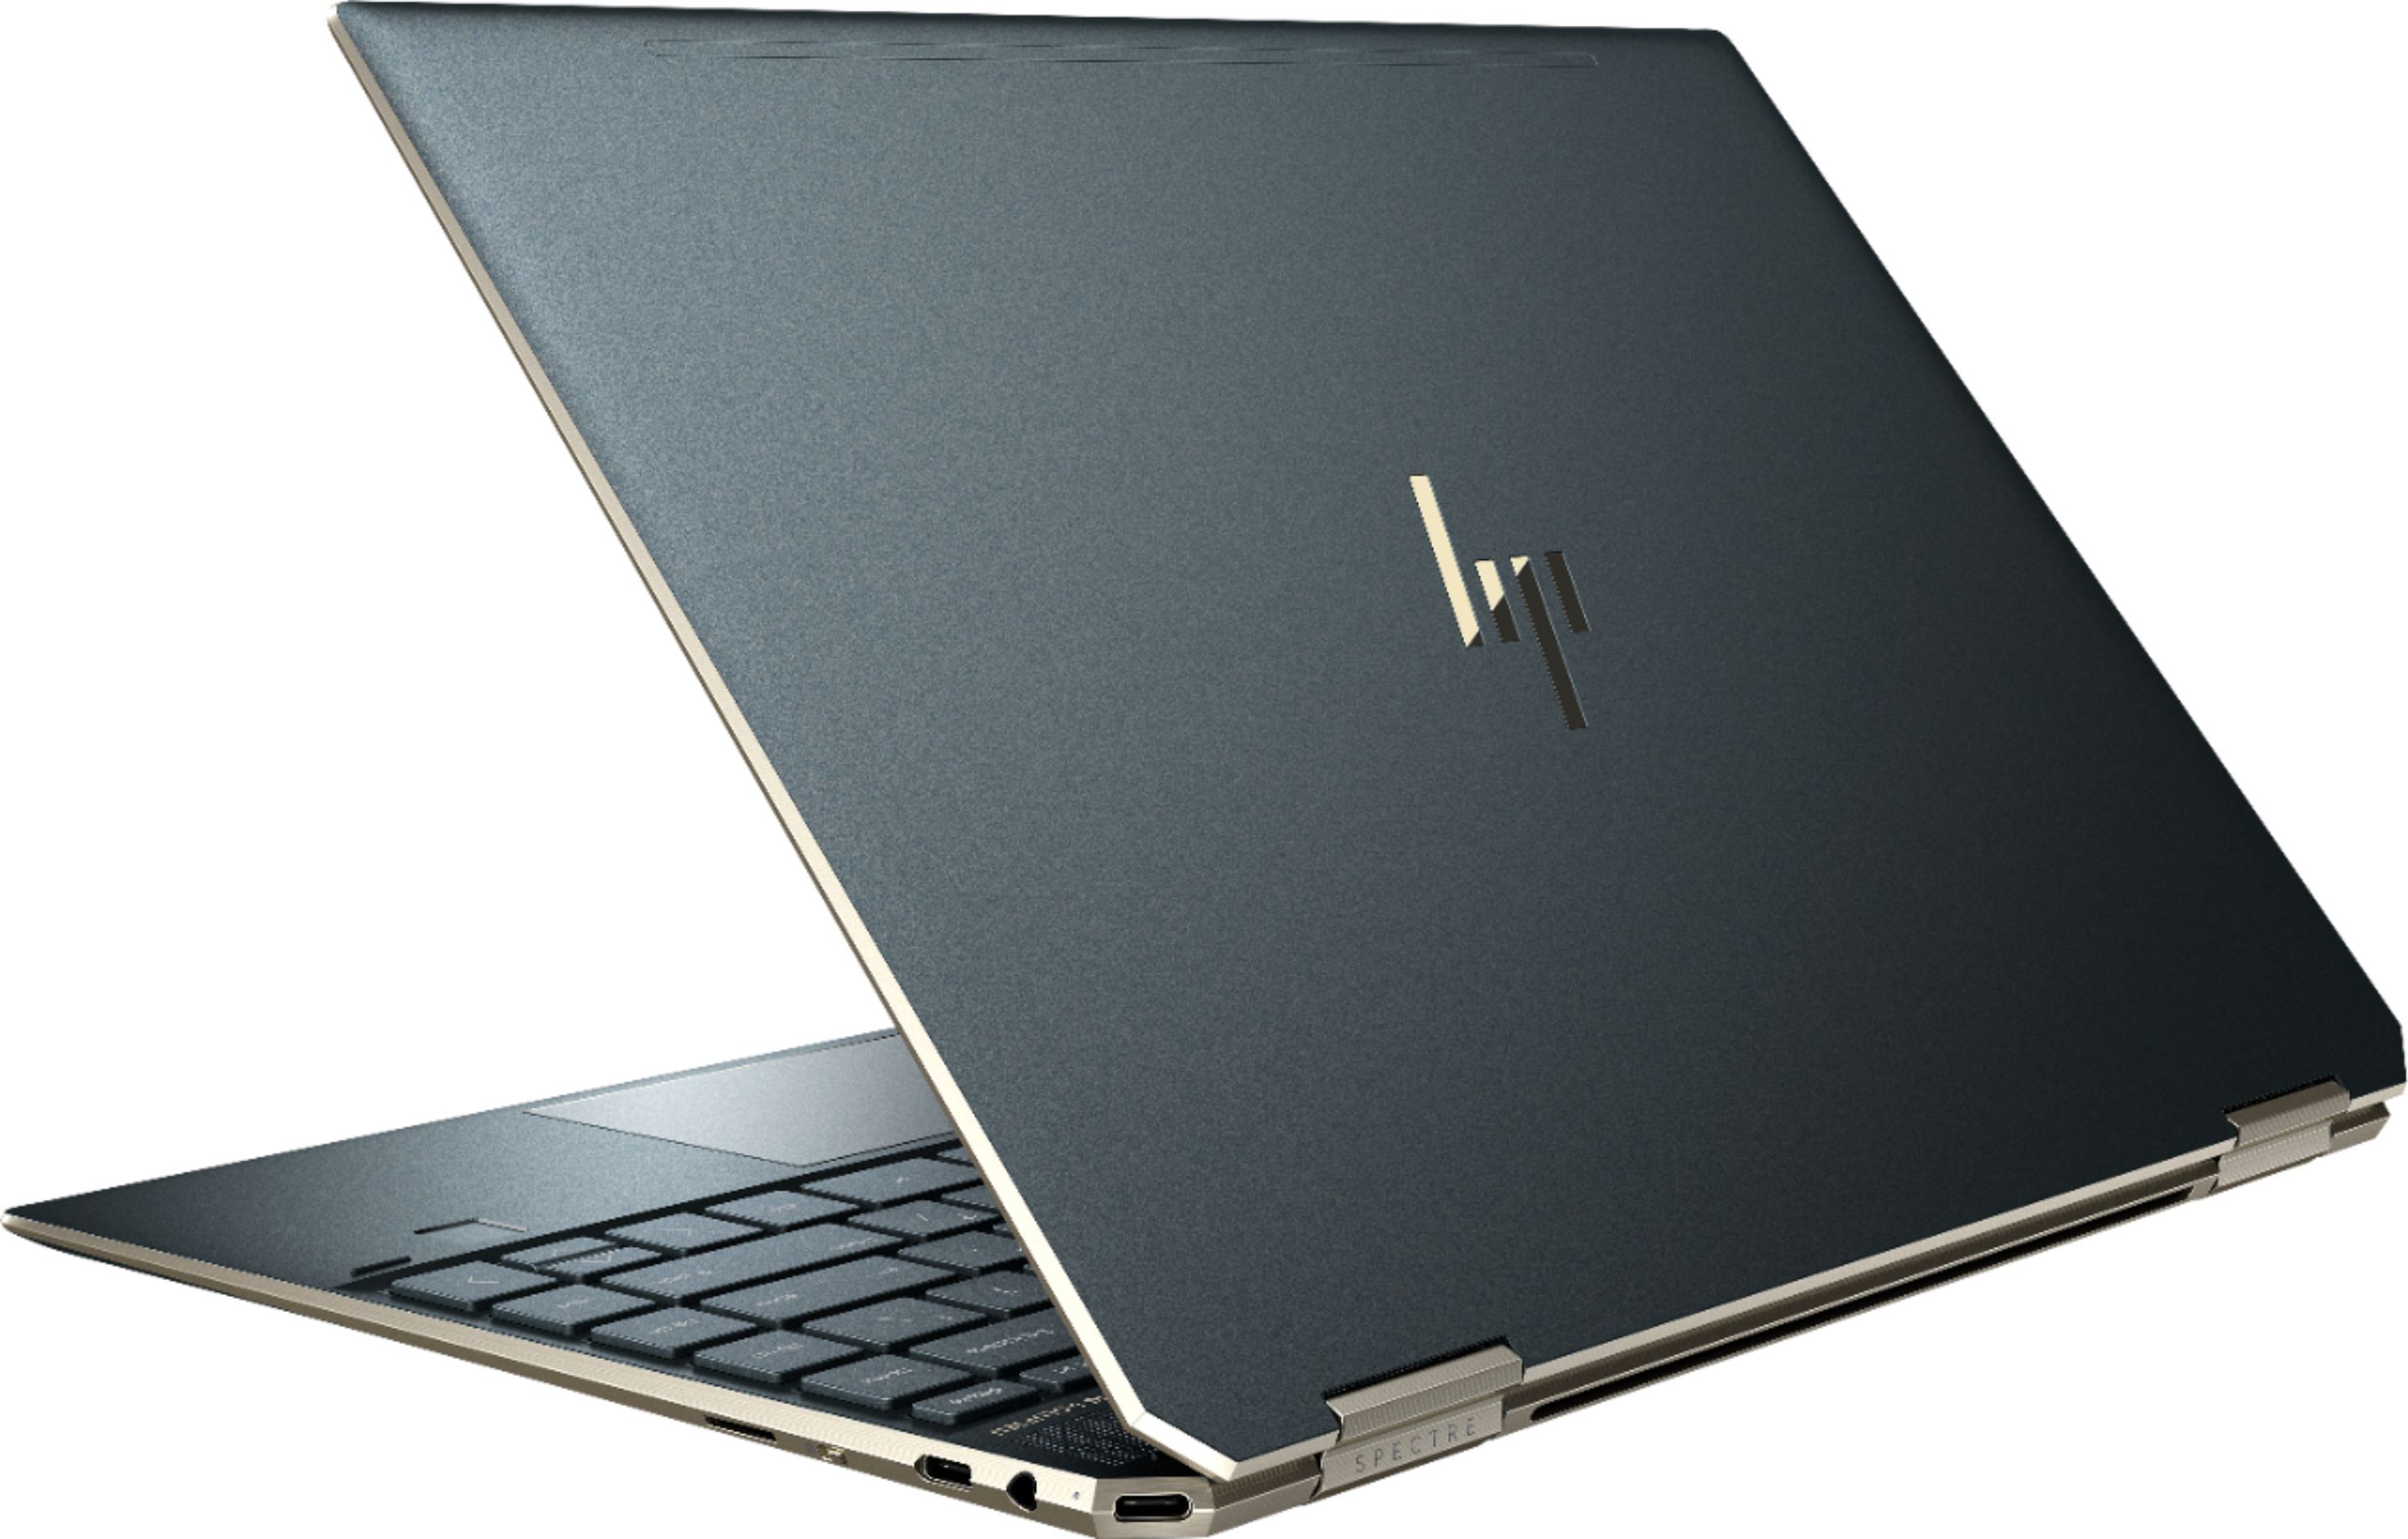 Questions and Answers: HP Spectre x360 2-in-1 13.3